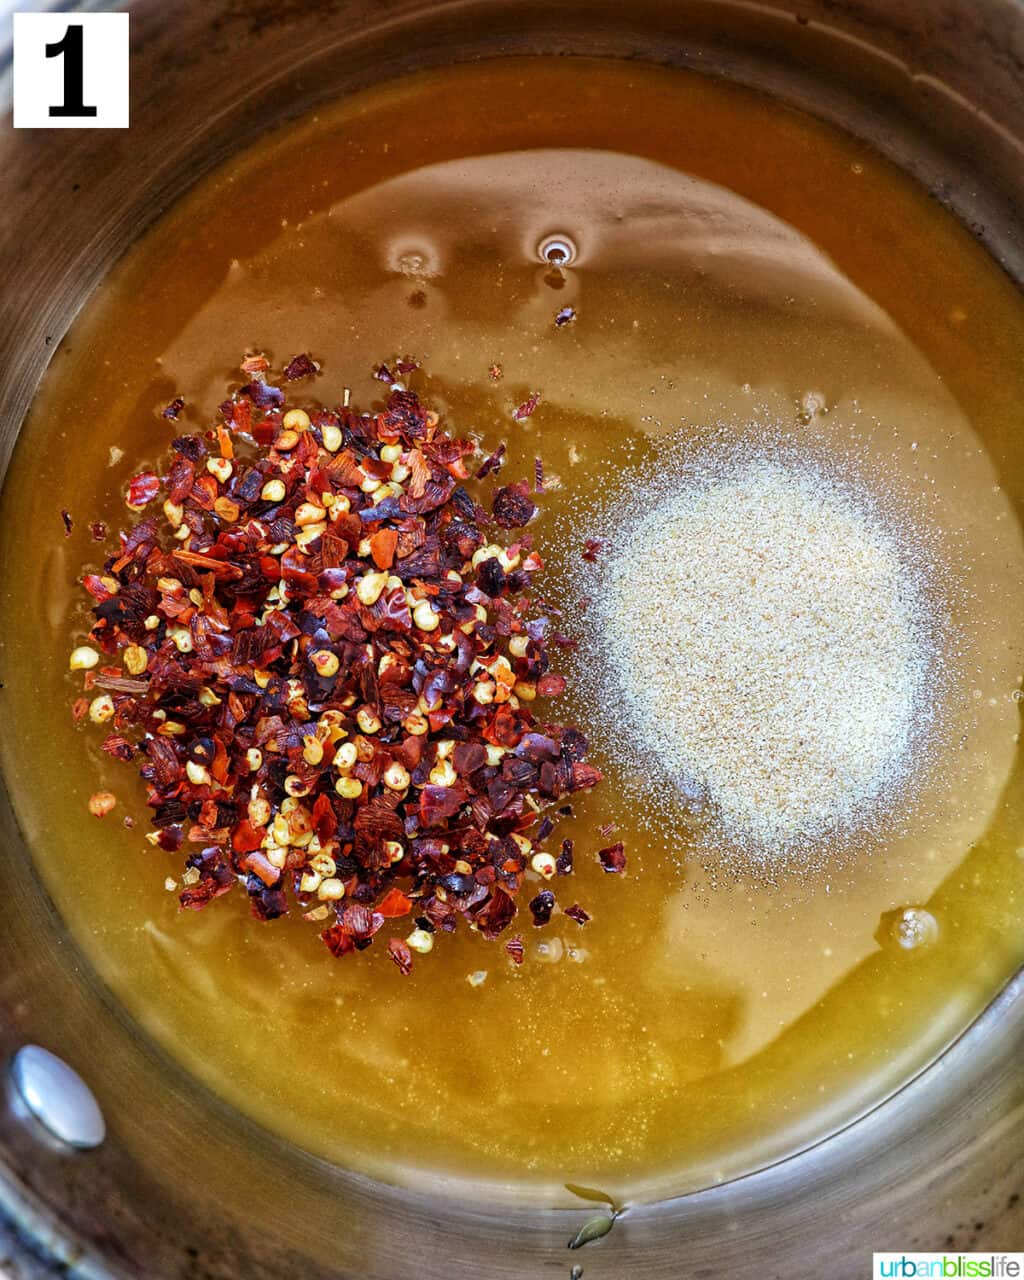 ingredients to make hot honey sauce in a saucepan, separate but ready to mix.